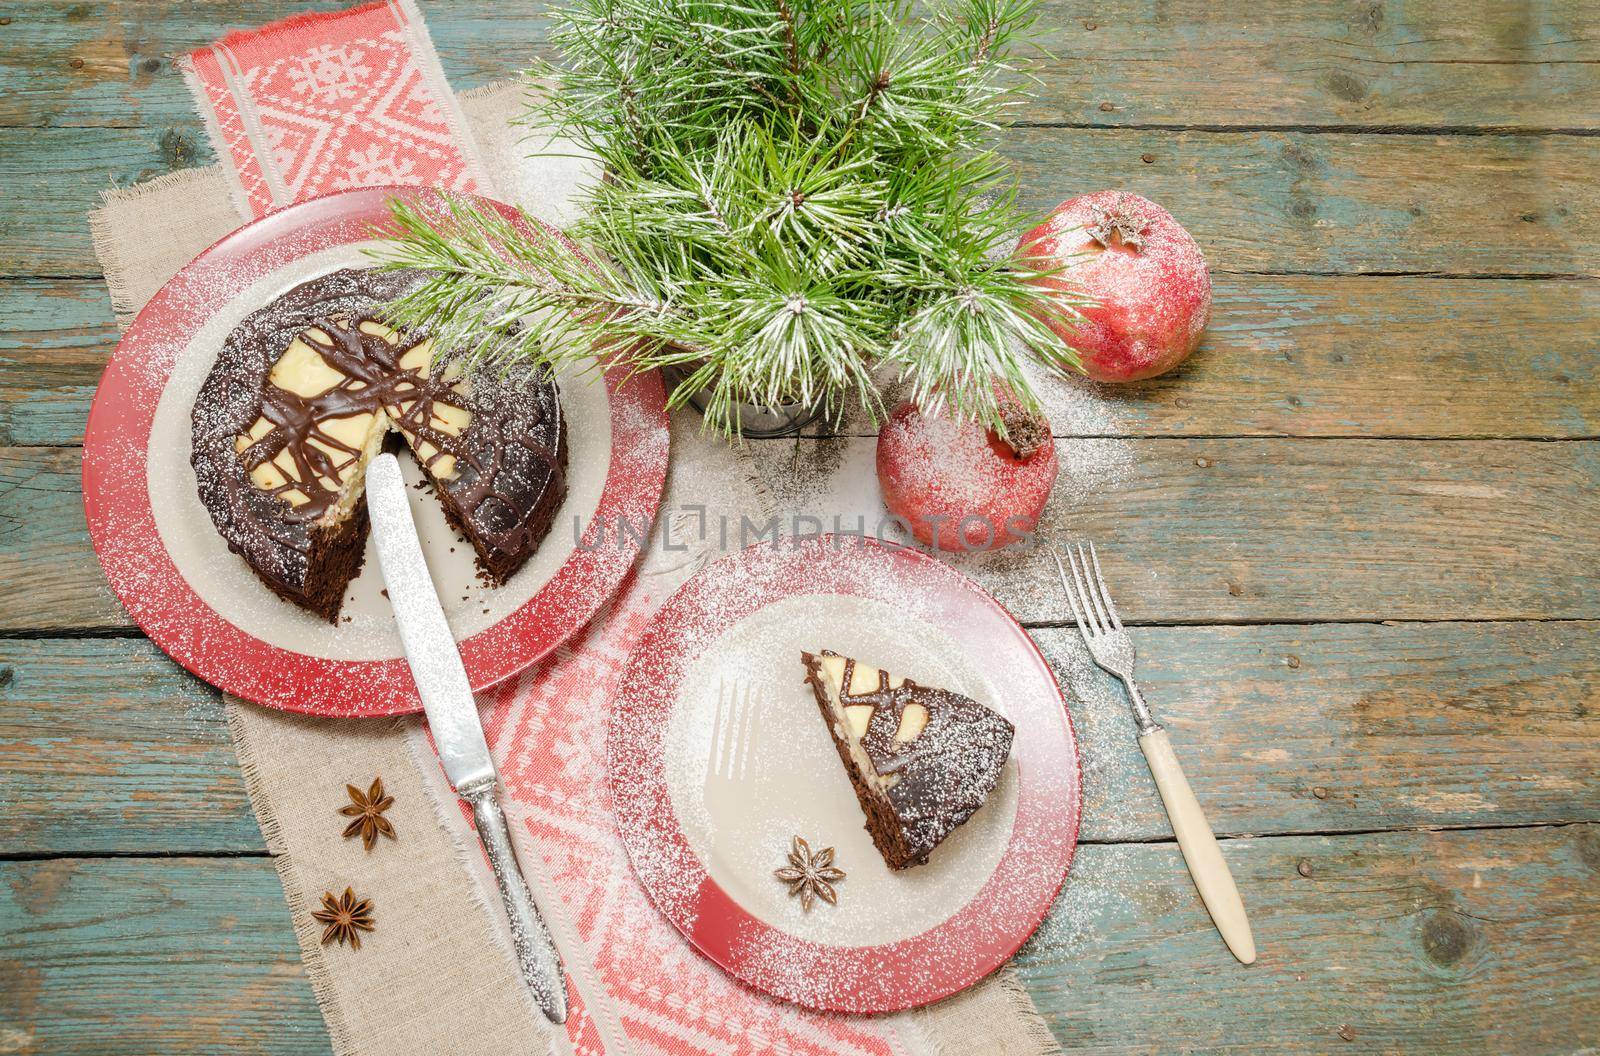 Still life with chocolate cake, Christmas tree and pomegranate by zimages